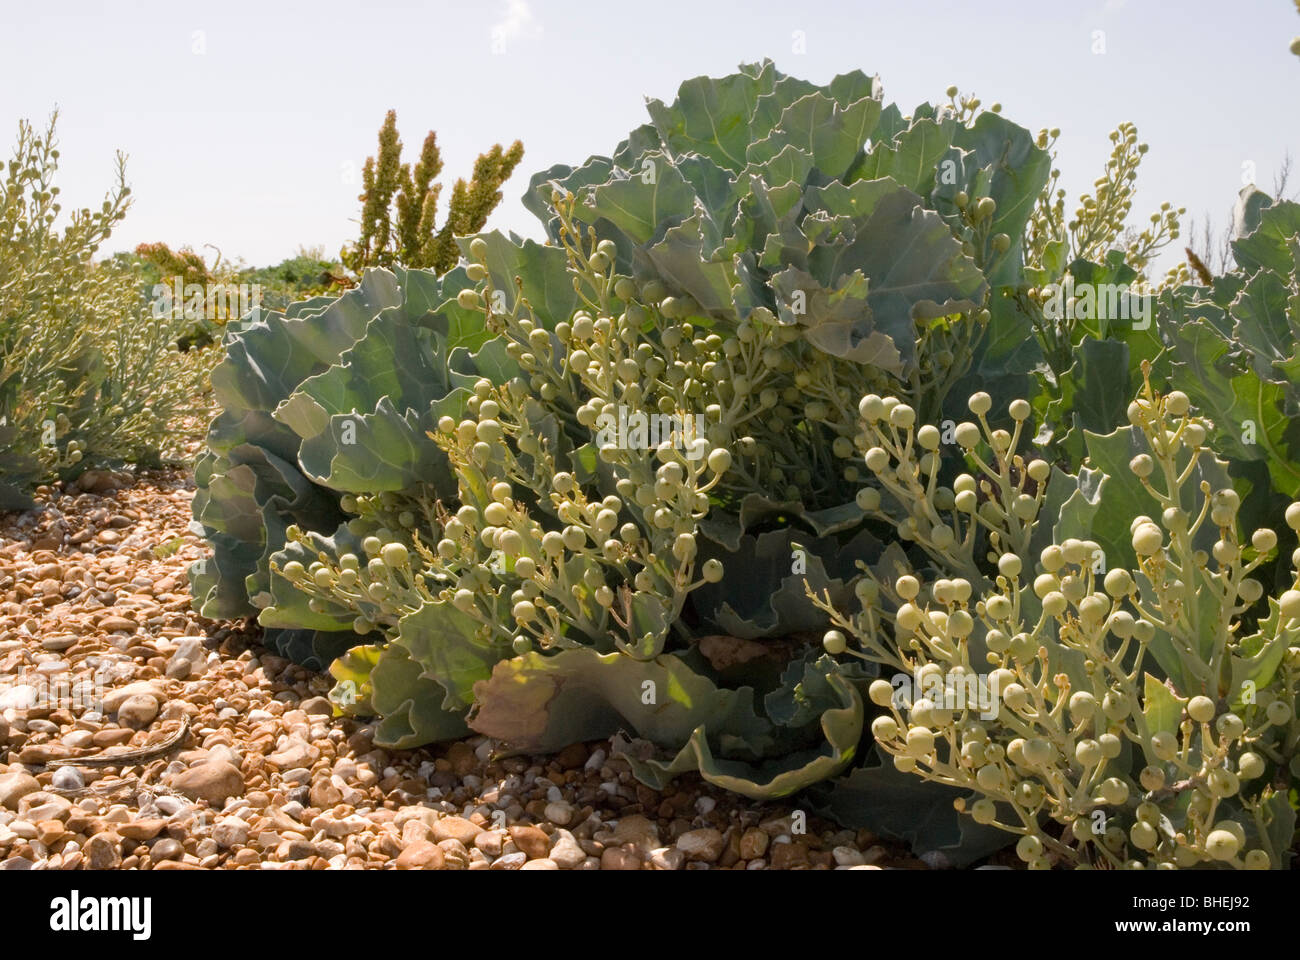 Landscape image of sea kale on a pebble beach at Dungeness, shot on a sunny day. Stock Photo